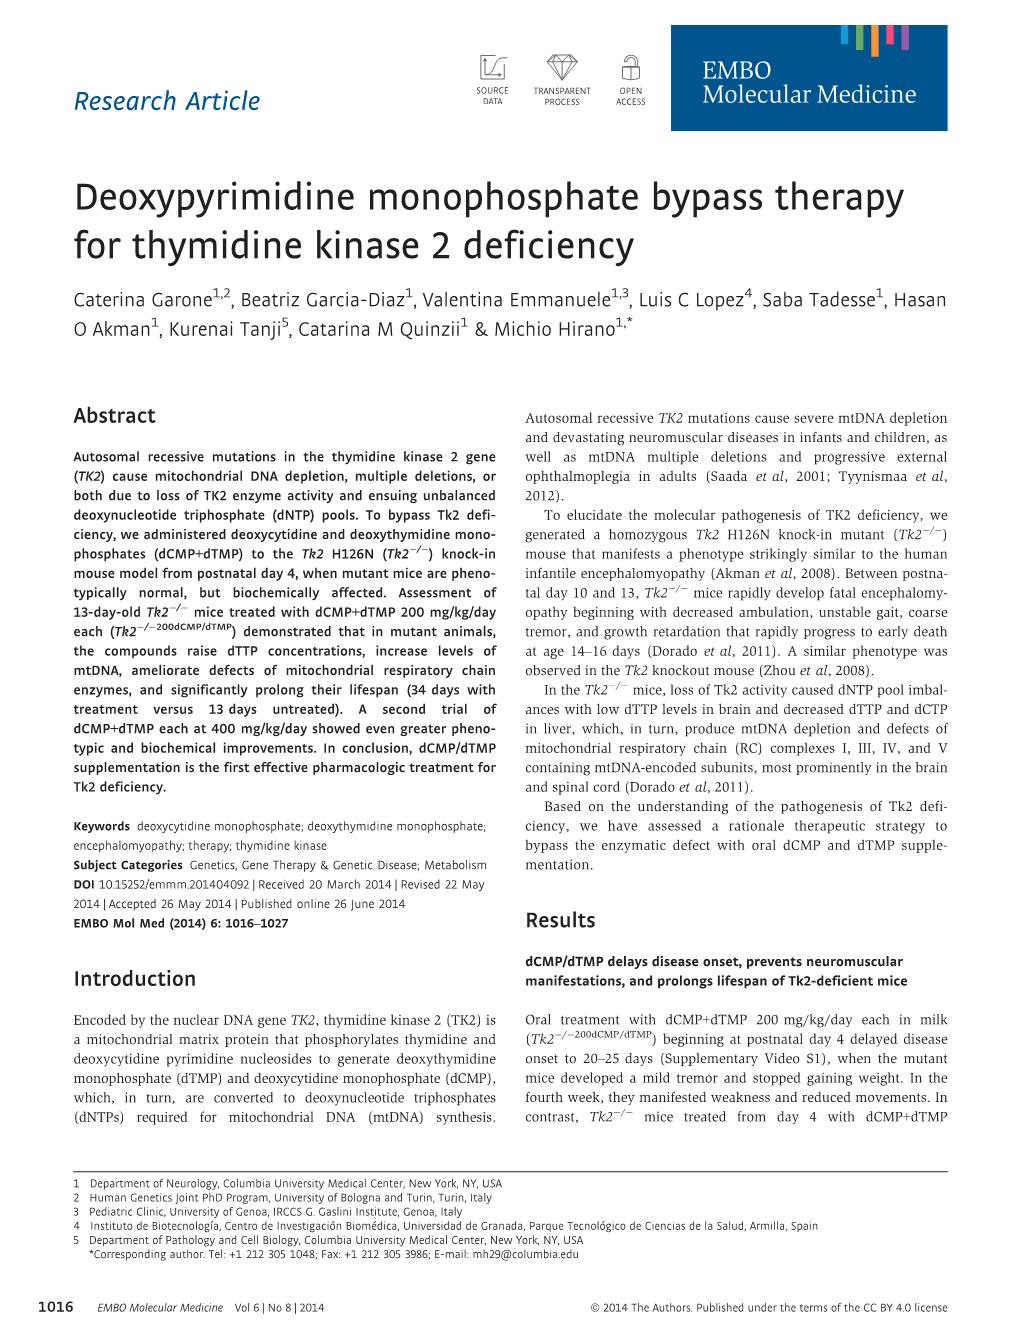 Deoxypyrimidine Monophosphate Bypass Therapy for Thymidine Kinase 2 Deficiency